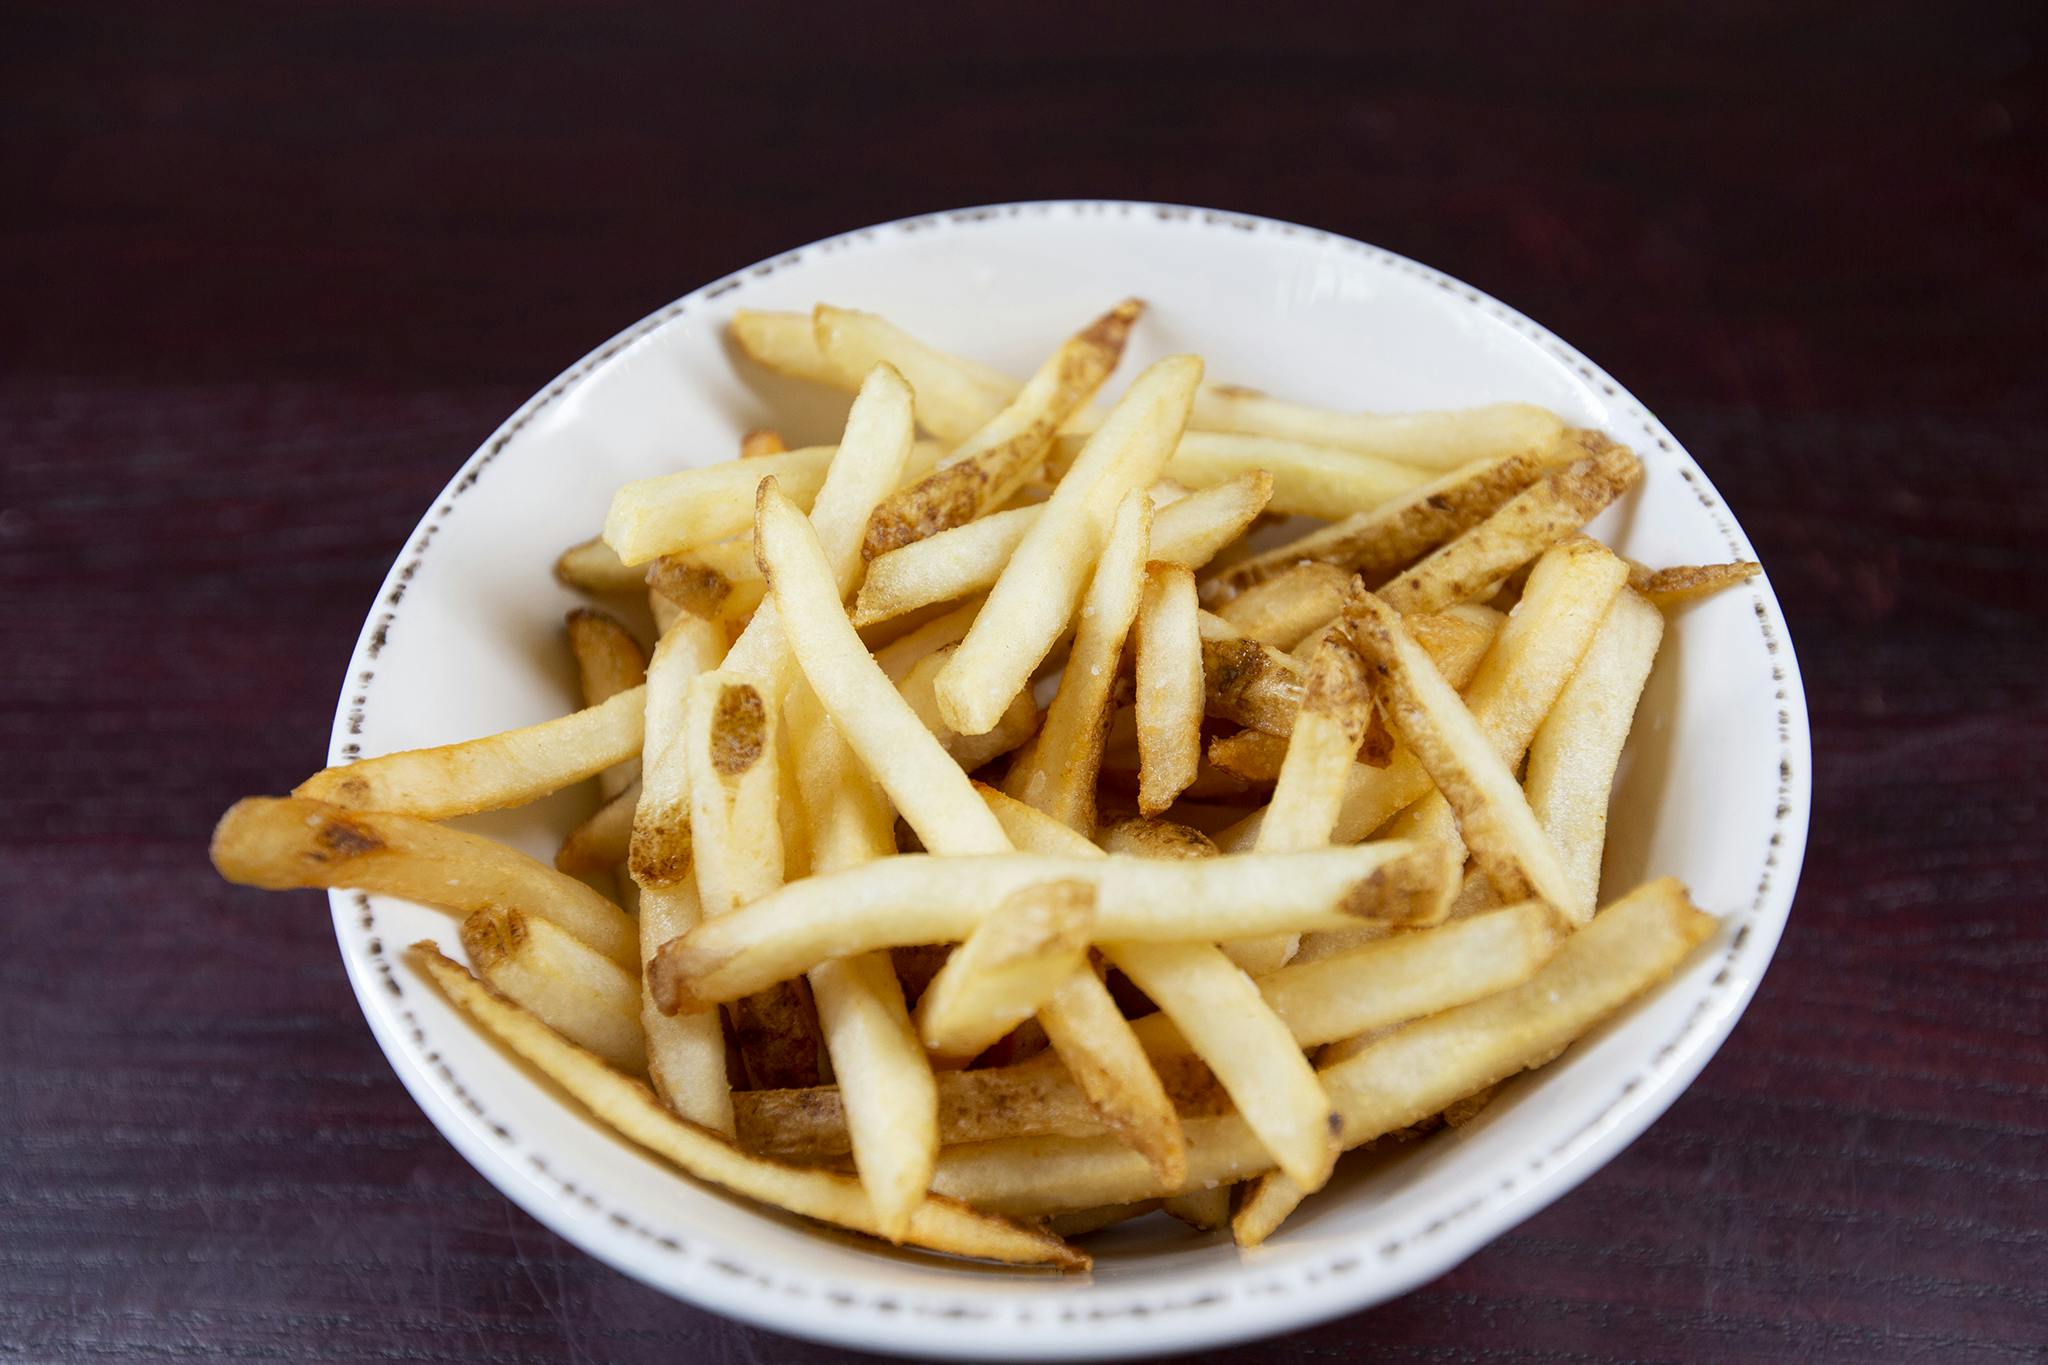 Hand Cut Fries Side from Firehouse Grill - Chicago Ave in Evanston, IL